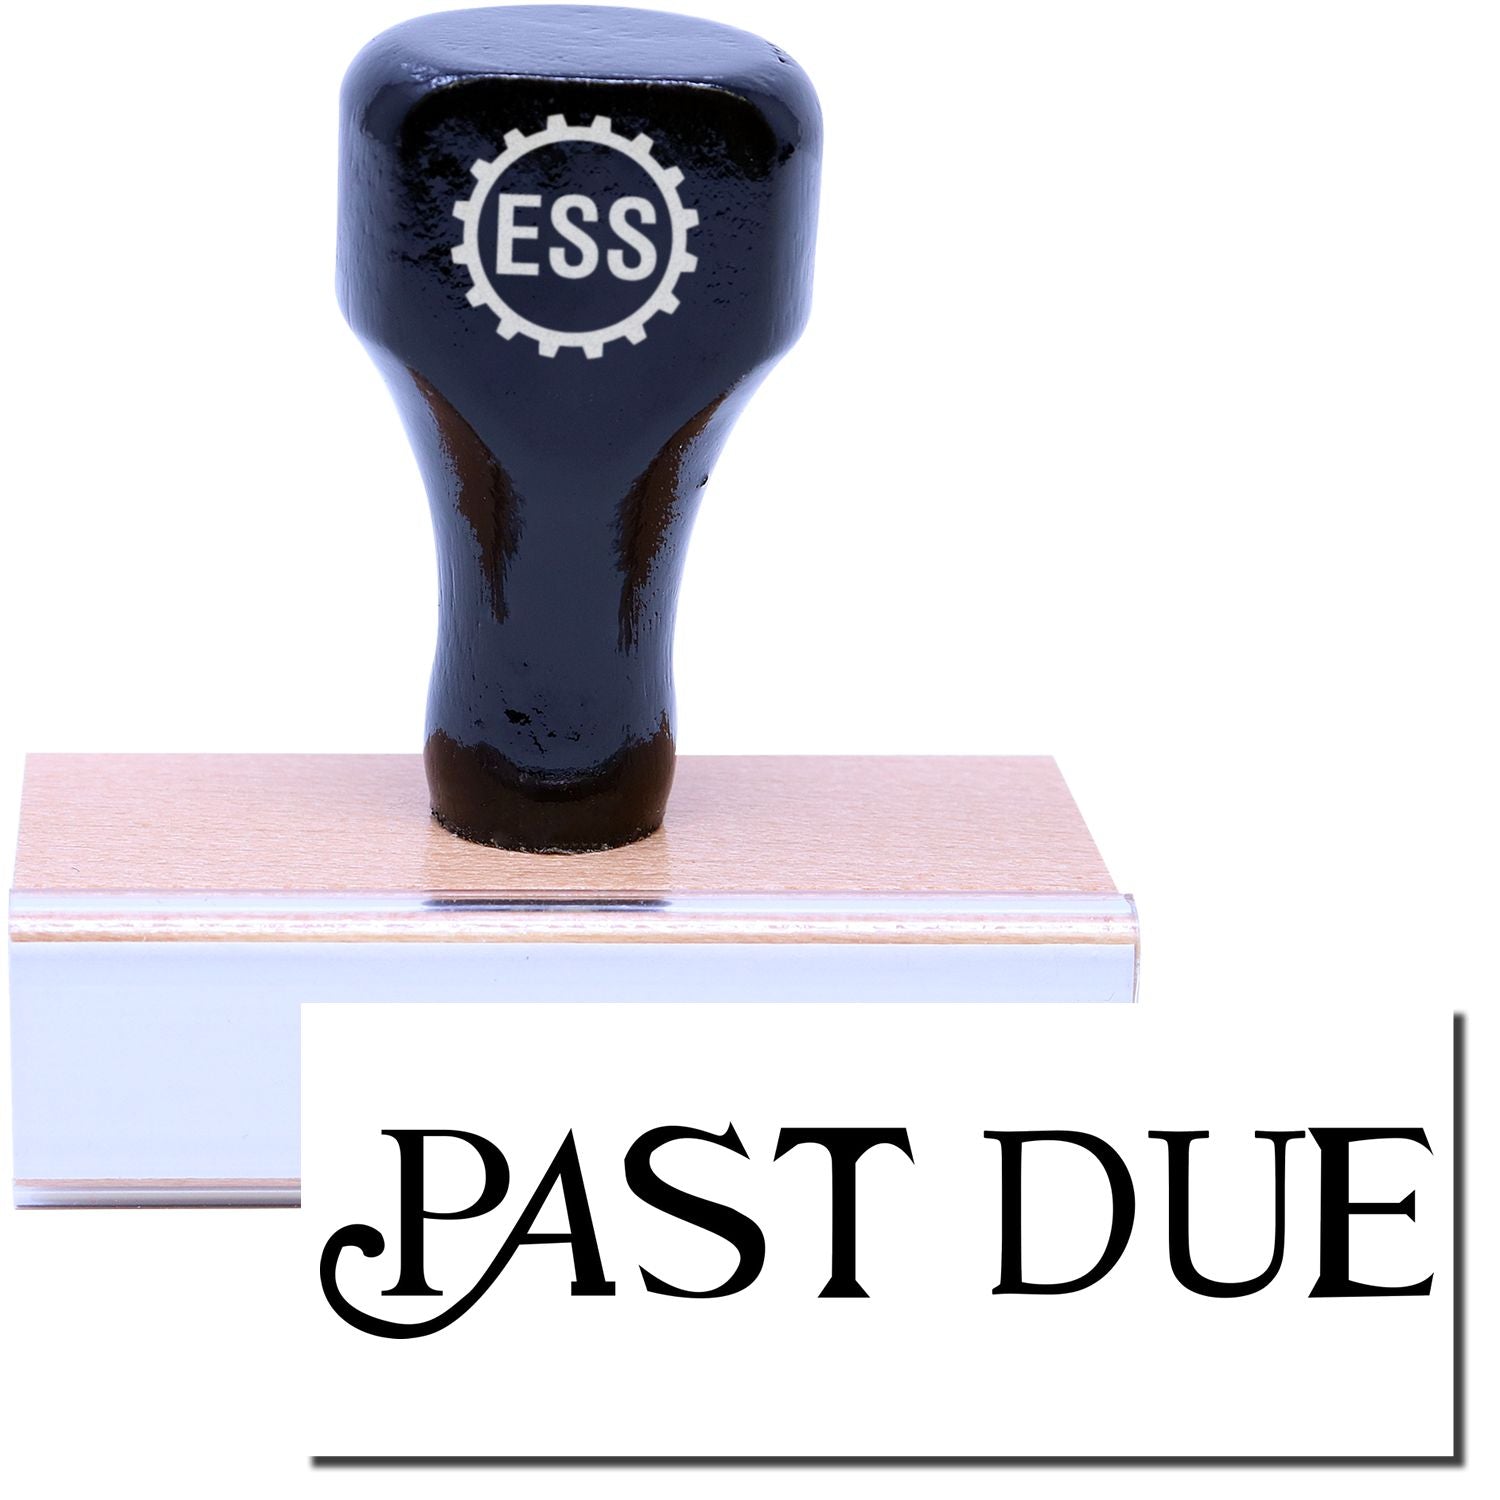 A stock office rubber stamp with a stamped image showing how the text "PAST DUE" in a curly font is displayed after stamping.